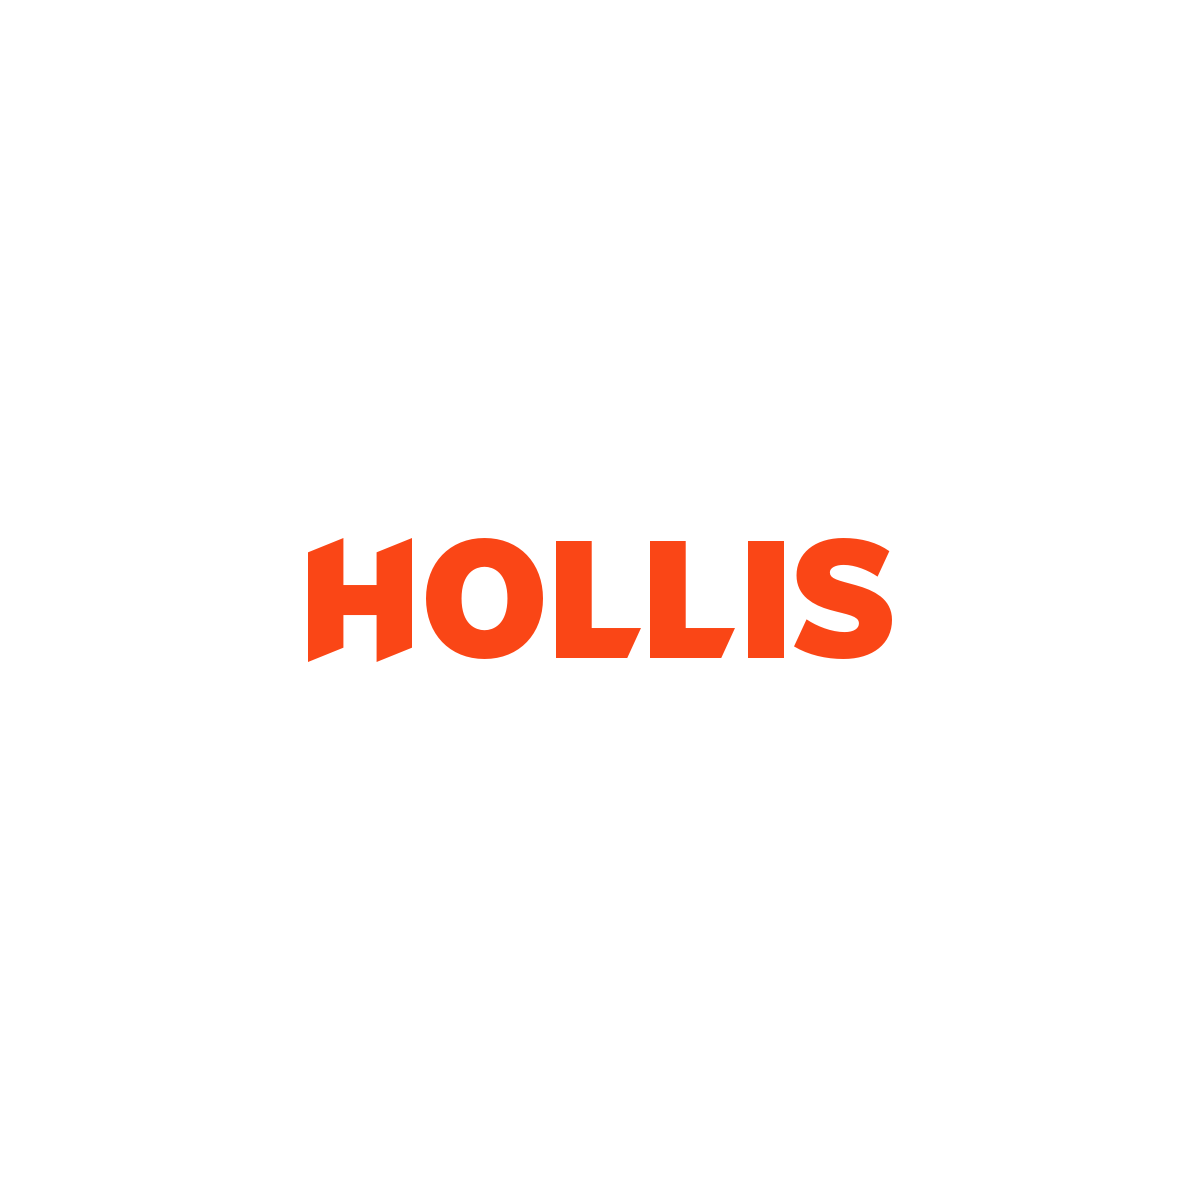 GoReport has helped streamline some of Hollis’ practices.